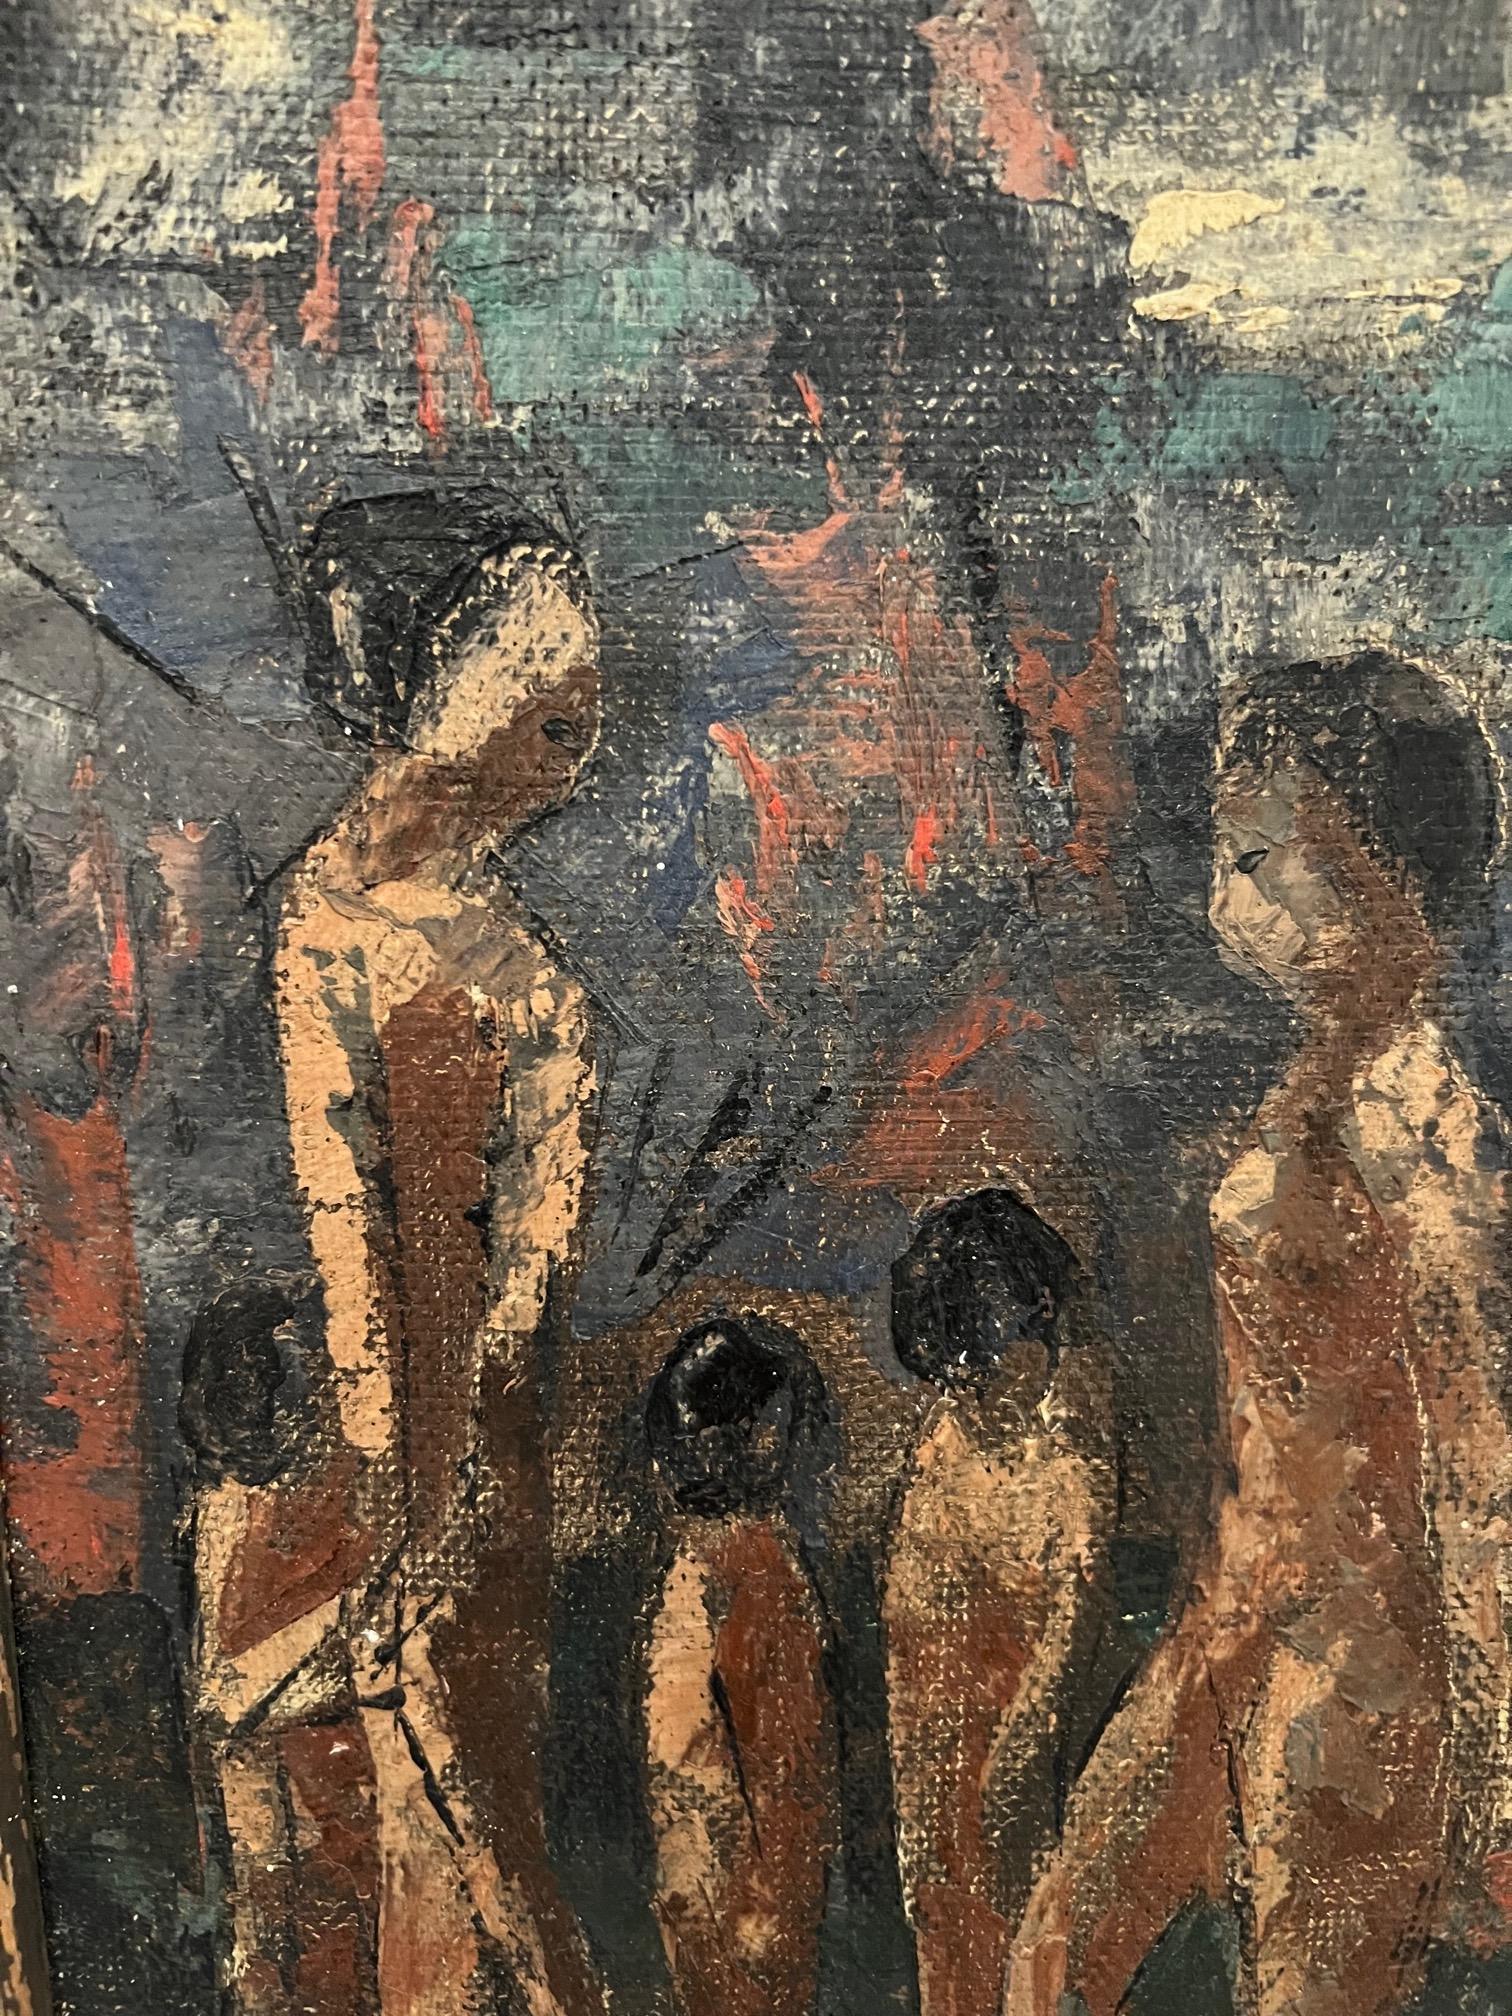 Mid-20th Century Mid-Century Modern Figural Painting of Indigenous People, Oil on Board, c. 1940 For Sale